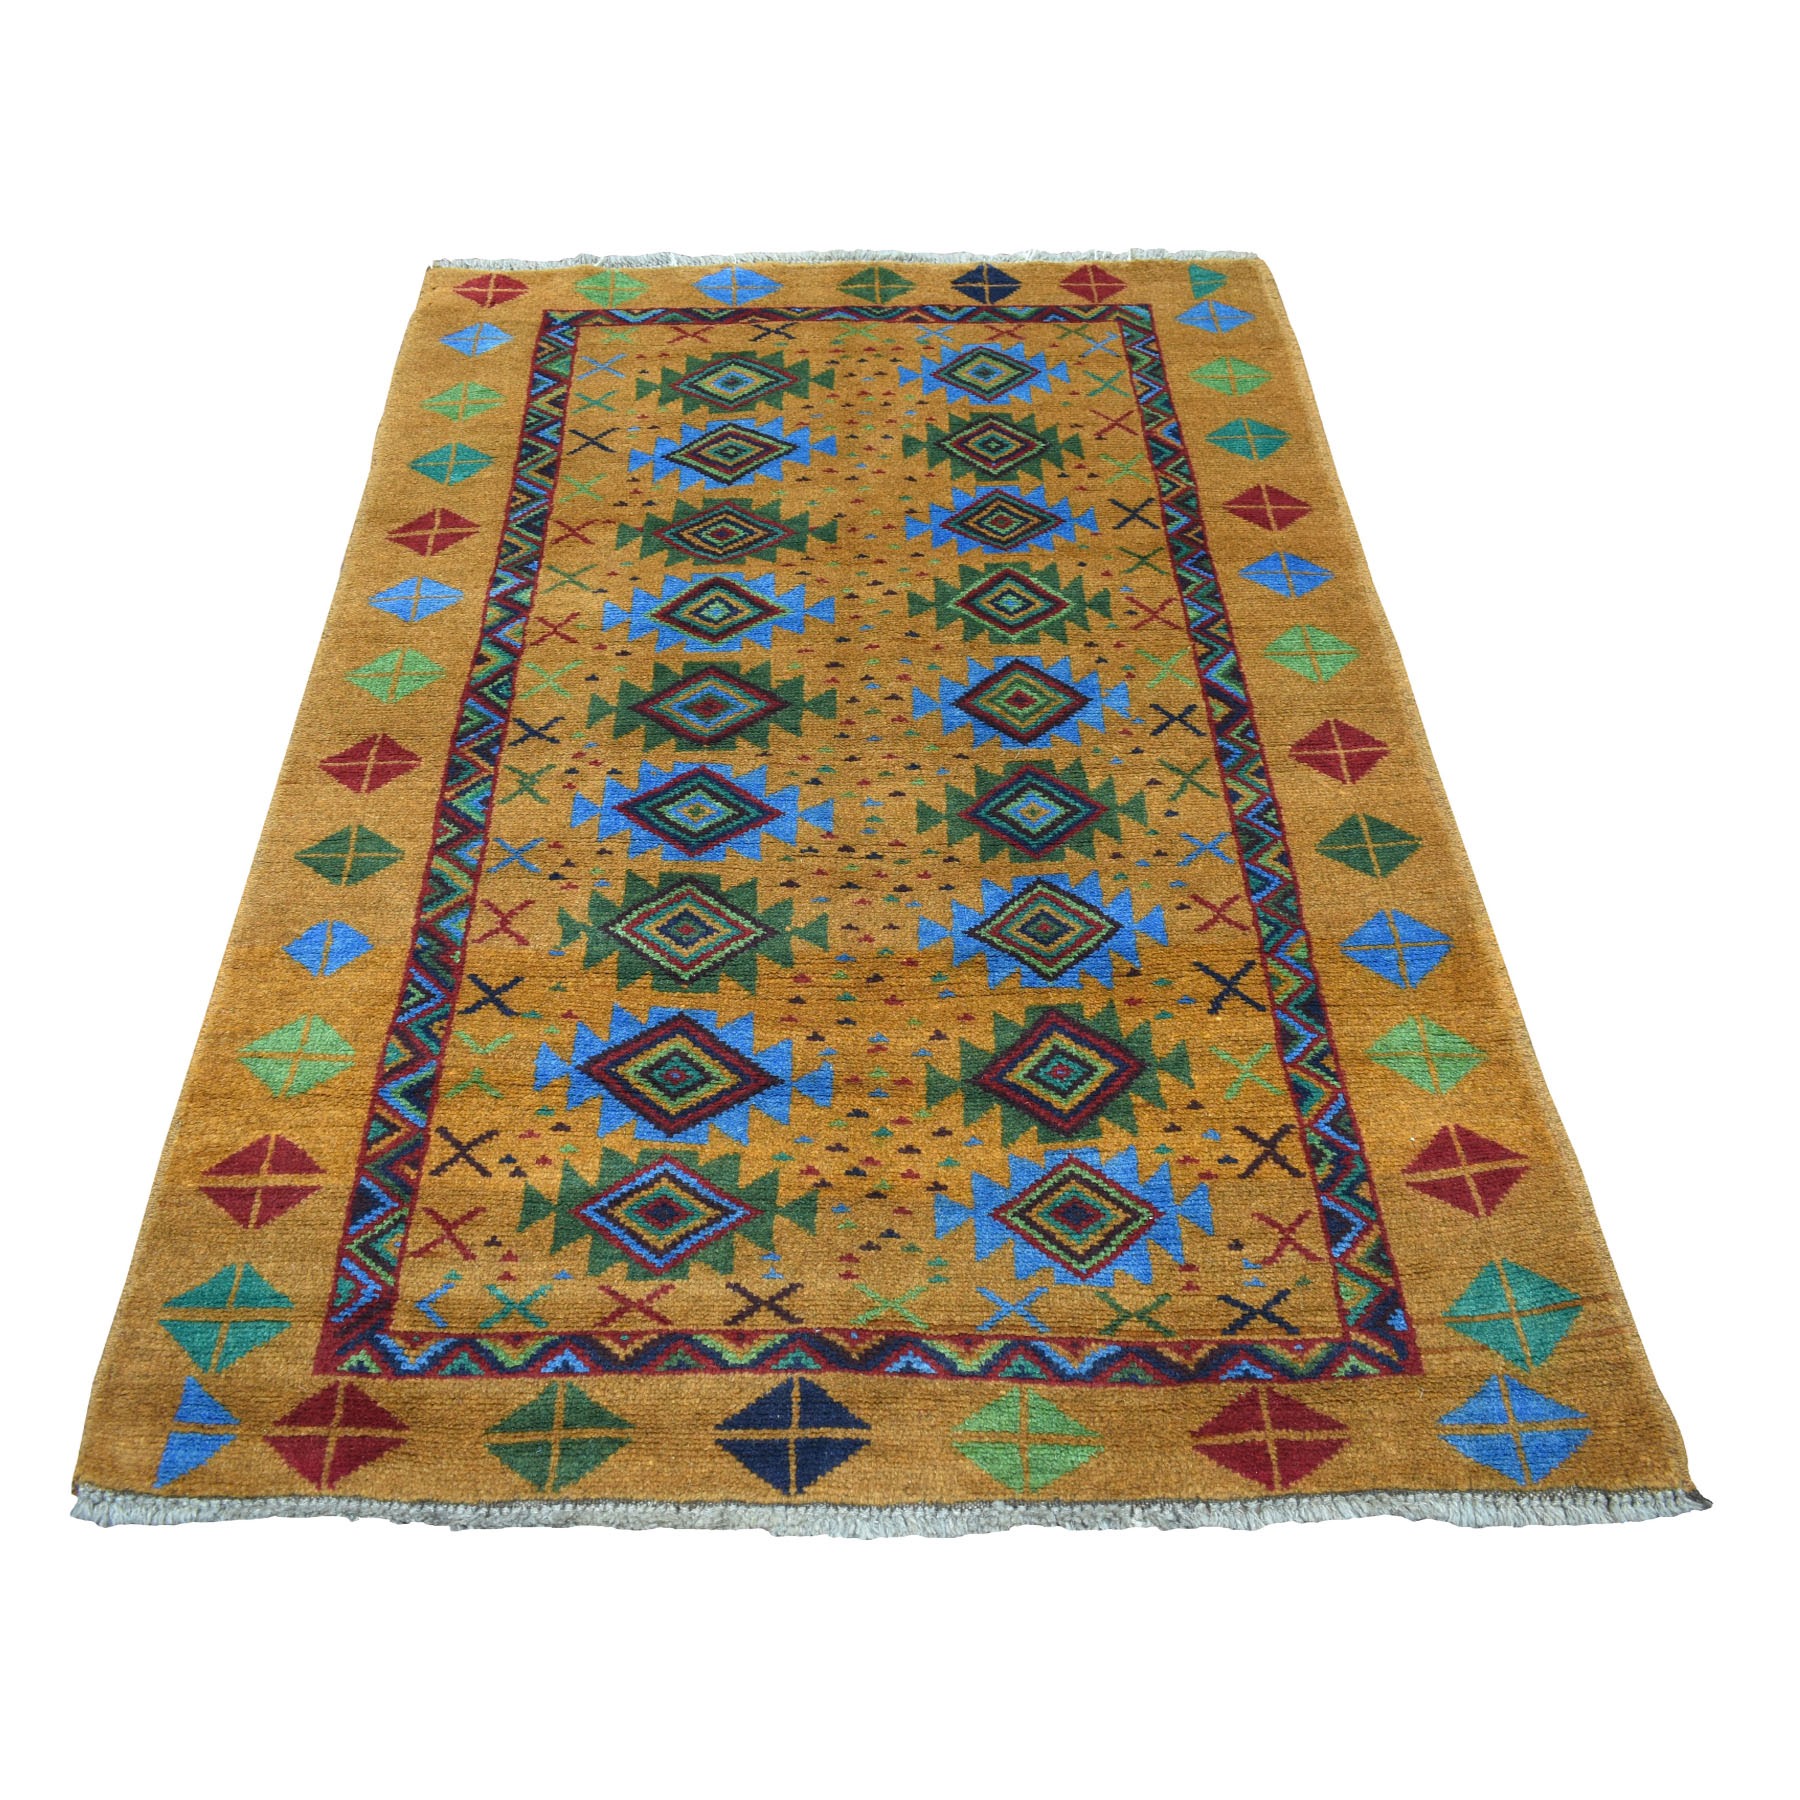 4'x6'1" Natural Dyes Colorful Afghan Baluch Geometric Design Hand Woven Pure Wool Oriental Rug 